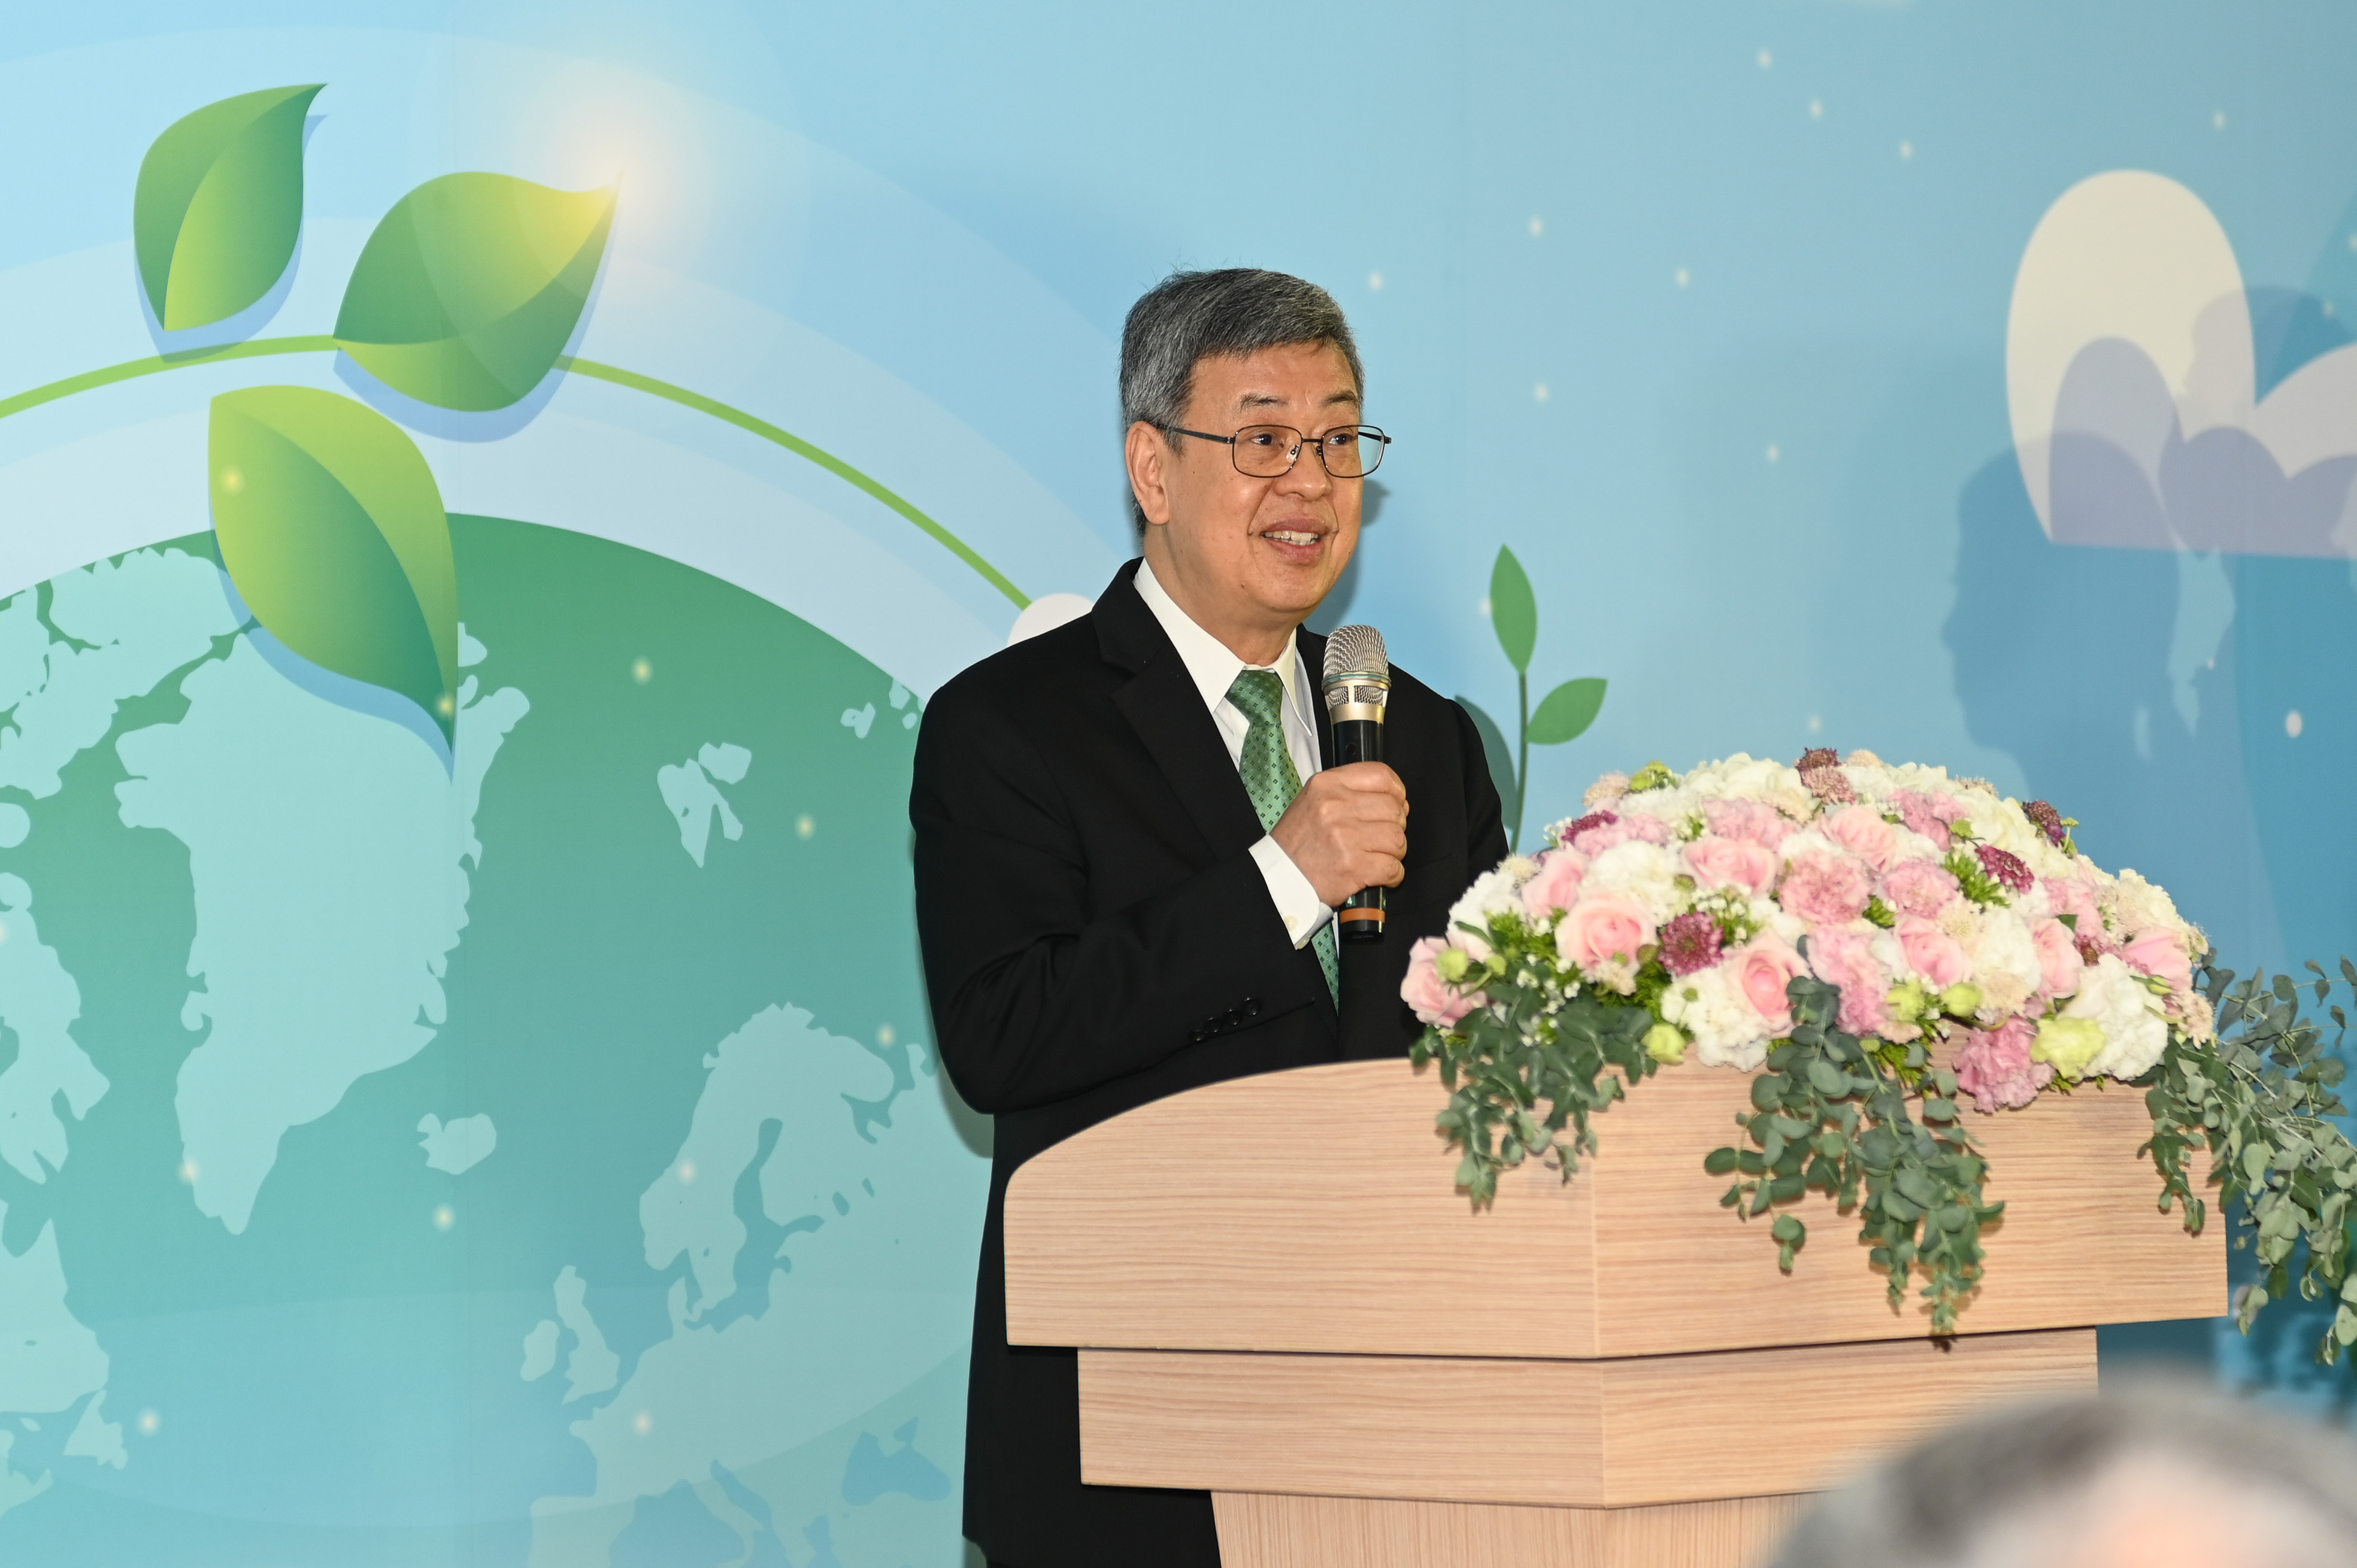 Premier Chen Chien-Jen stated that the establishment of the Preparatory Office of the Climate Change Agency (POCCA) is a key to Taiwan's climate change action.